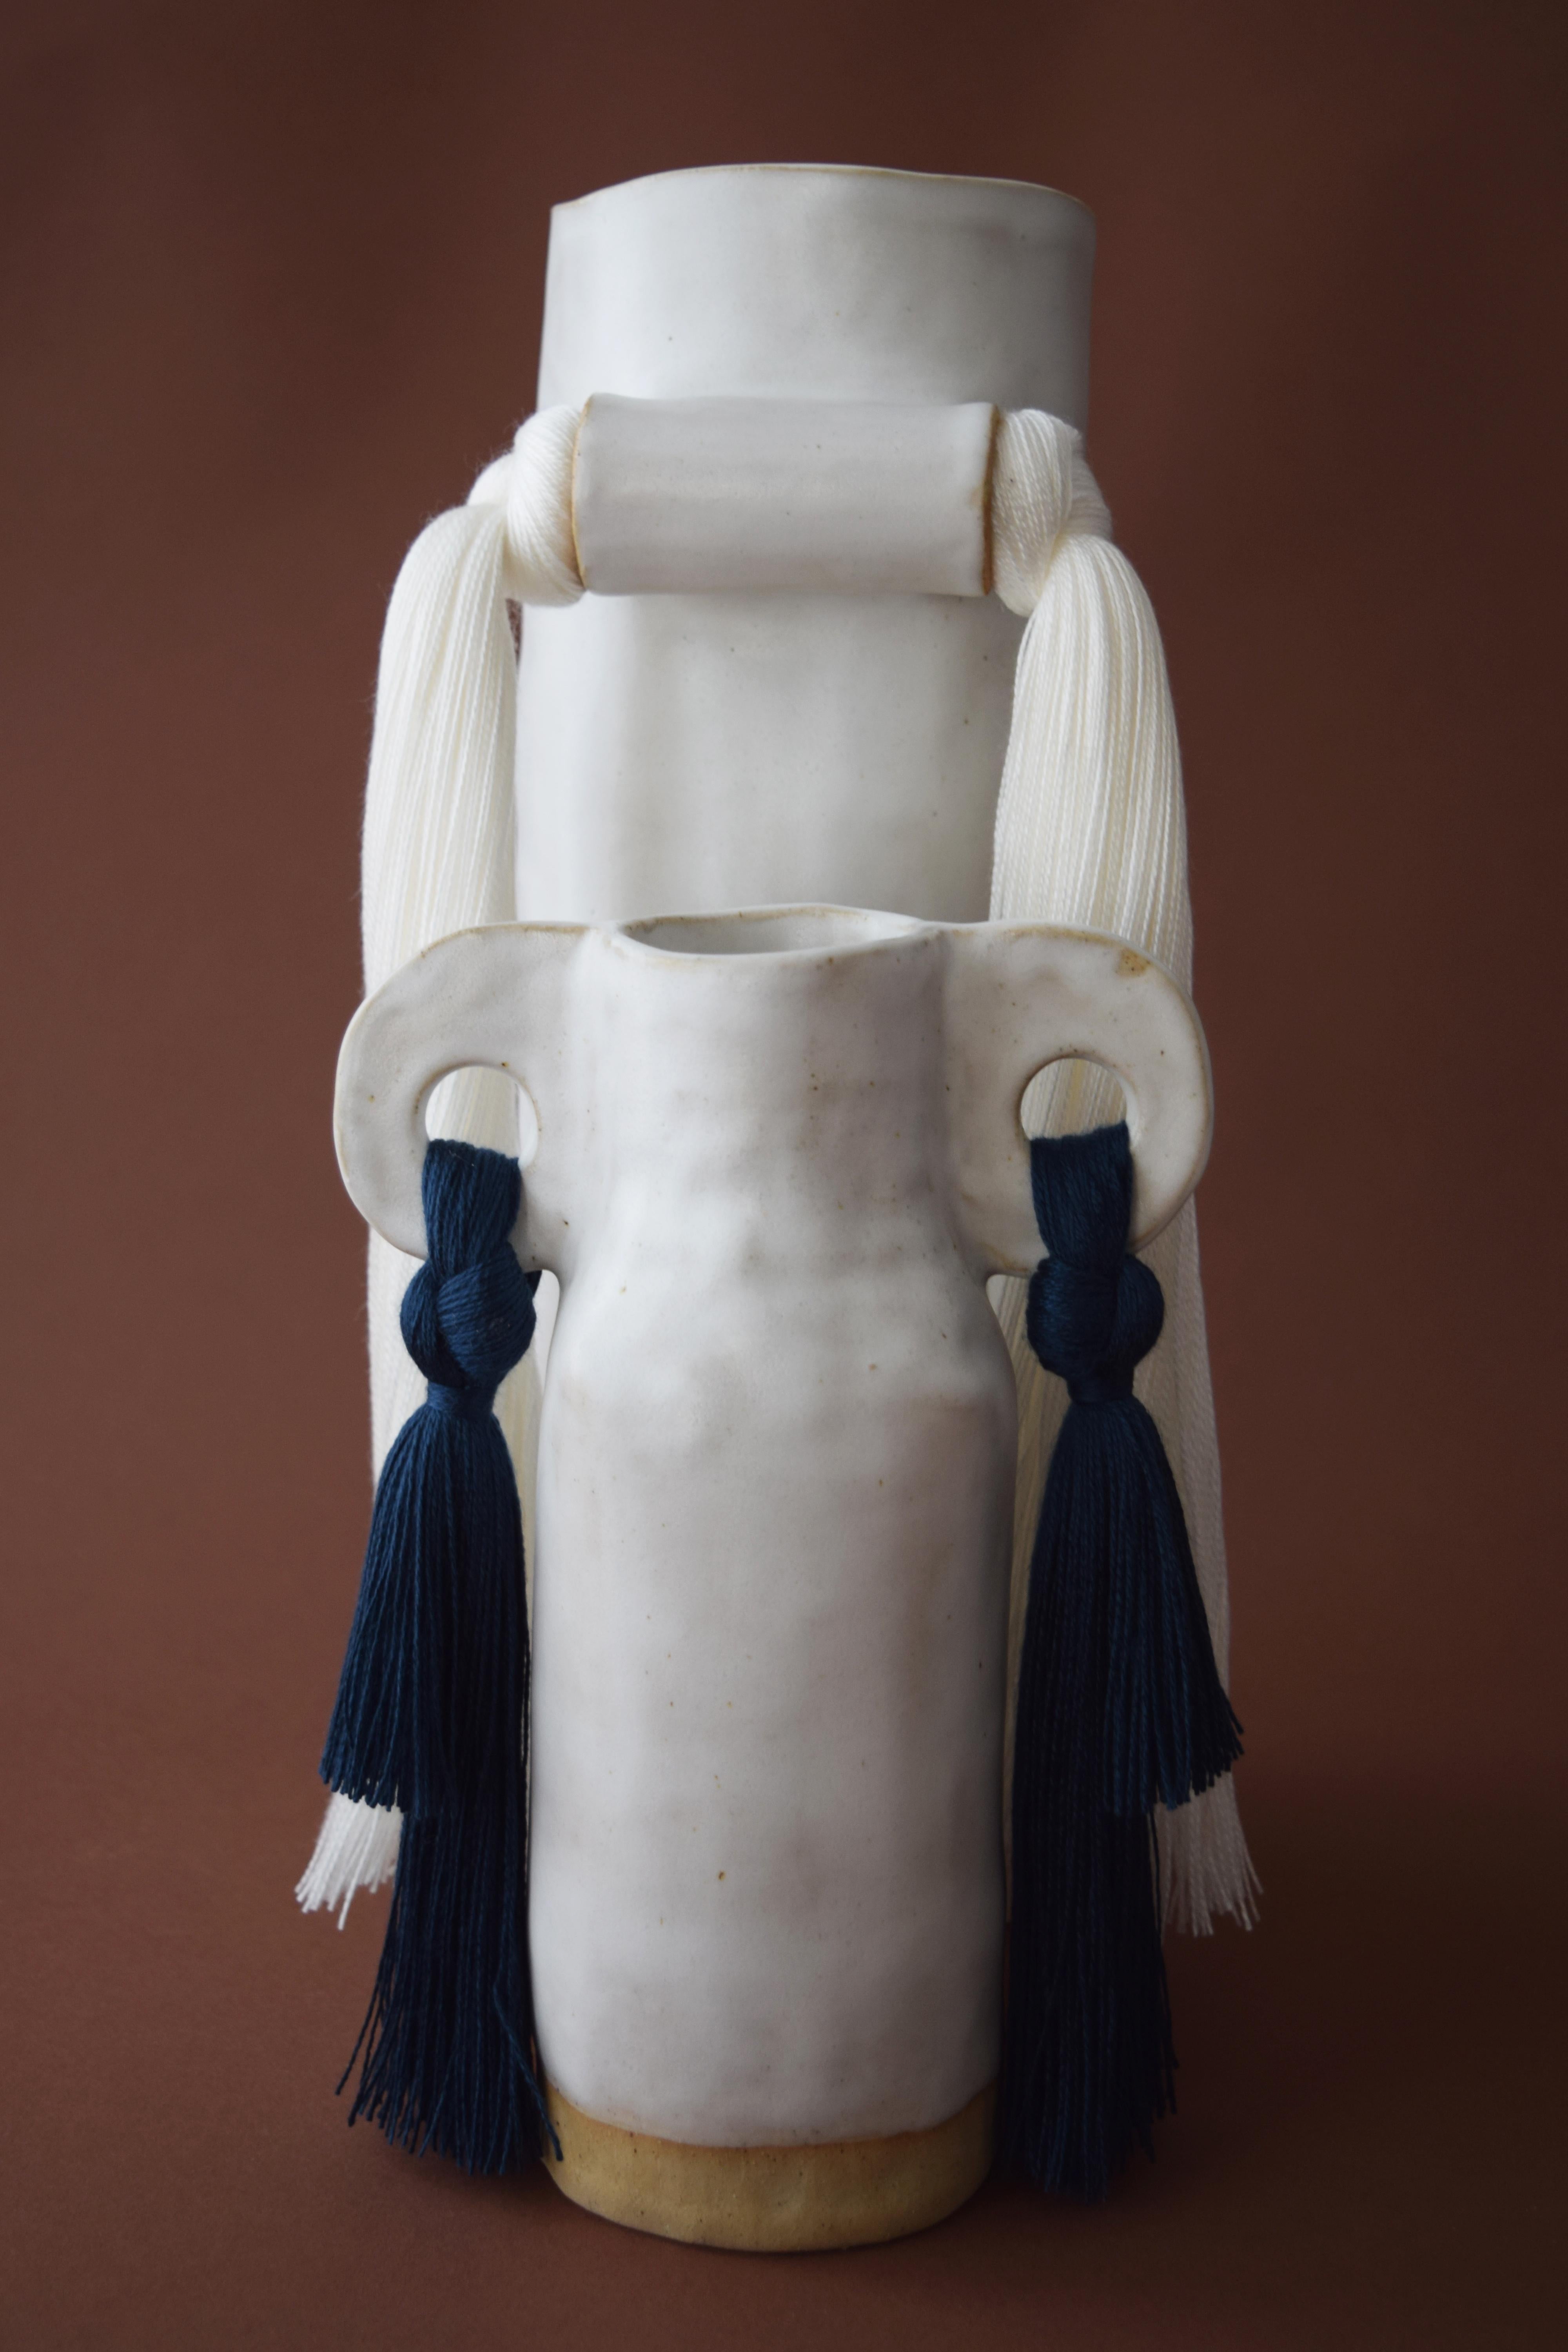 Vase #531 by Karen Gayle Tinney

Quiet symmetry and front-facing fringe details make this vase perfect for display on a shelf or table.

Hand formed beige stoneware with satin white glaze with white tencel fringe detail. Inside is glazed white,